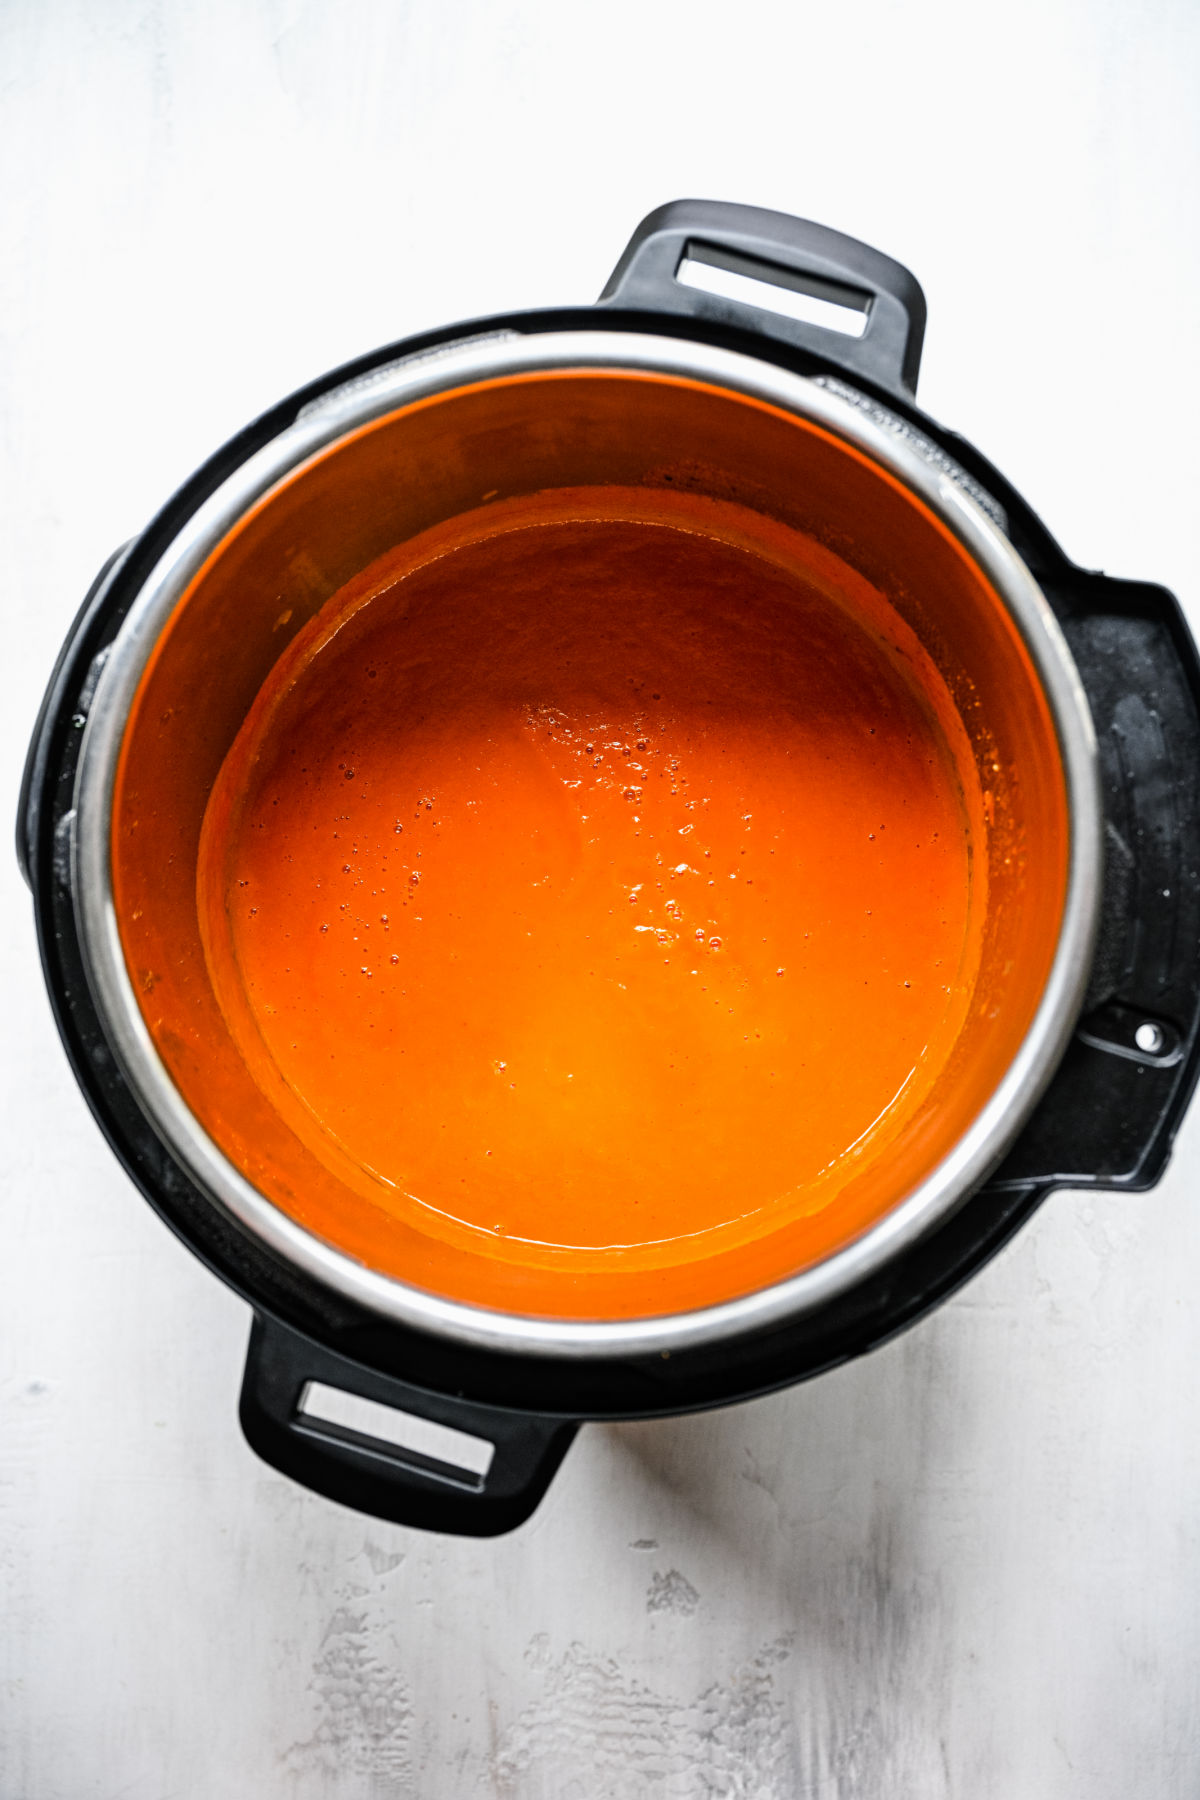 Blended tomato soup in an Instant Pot.